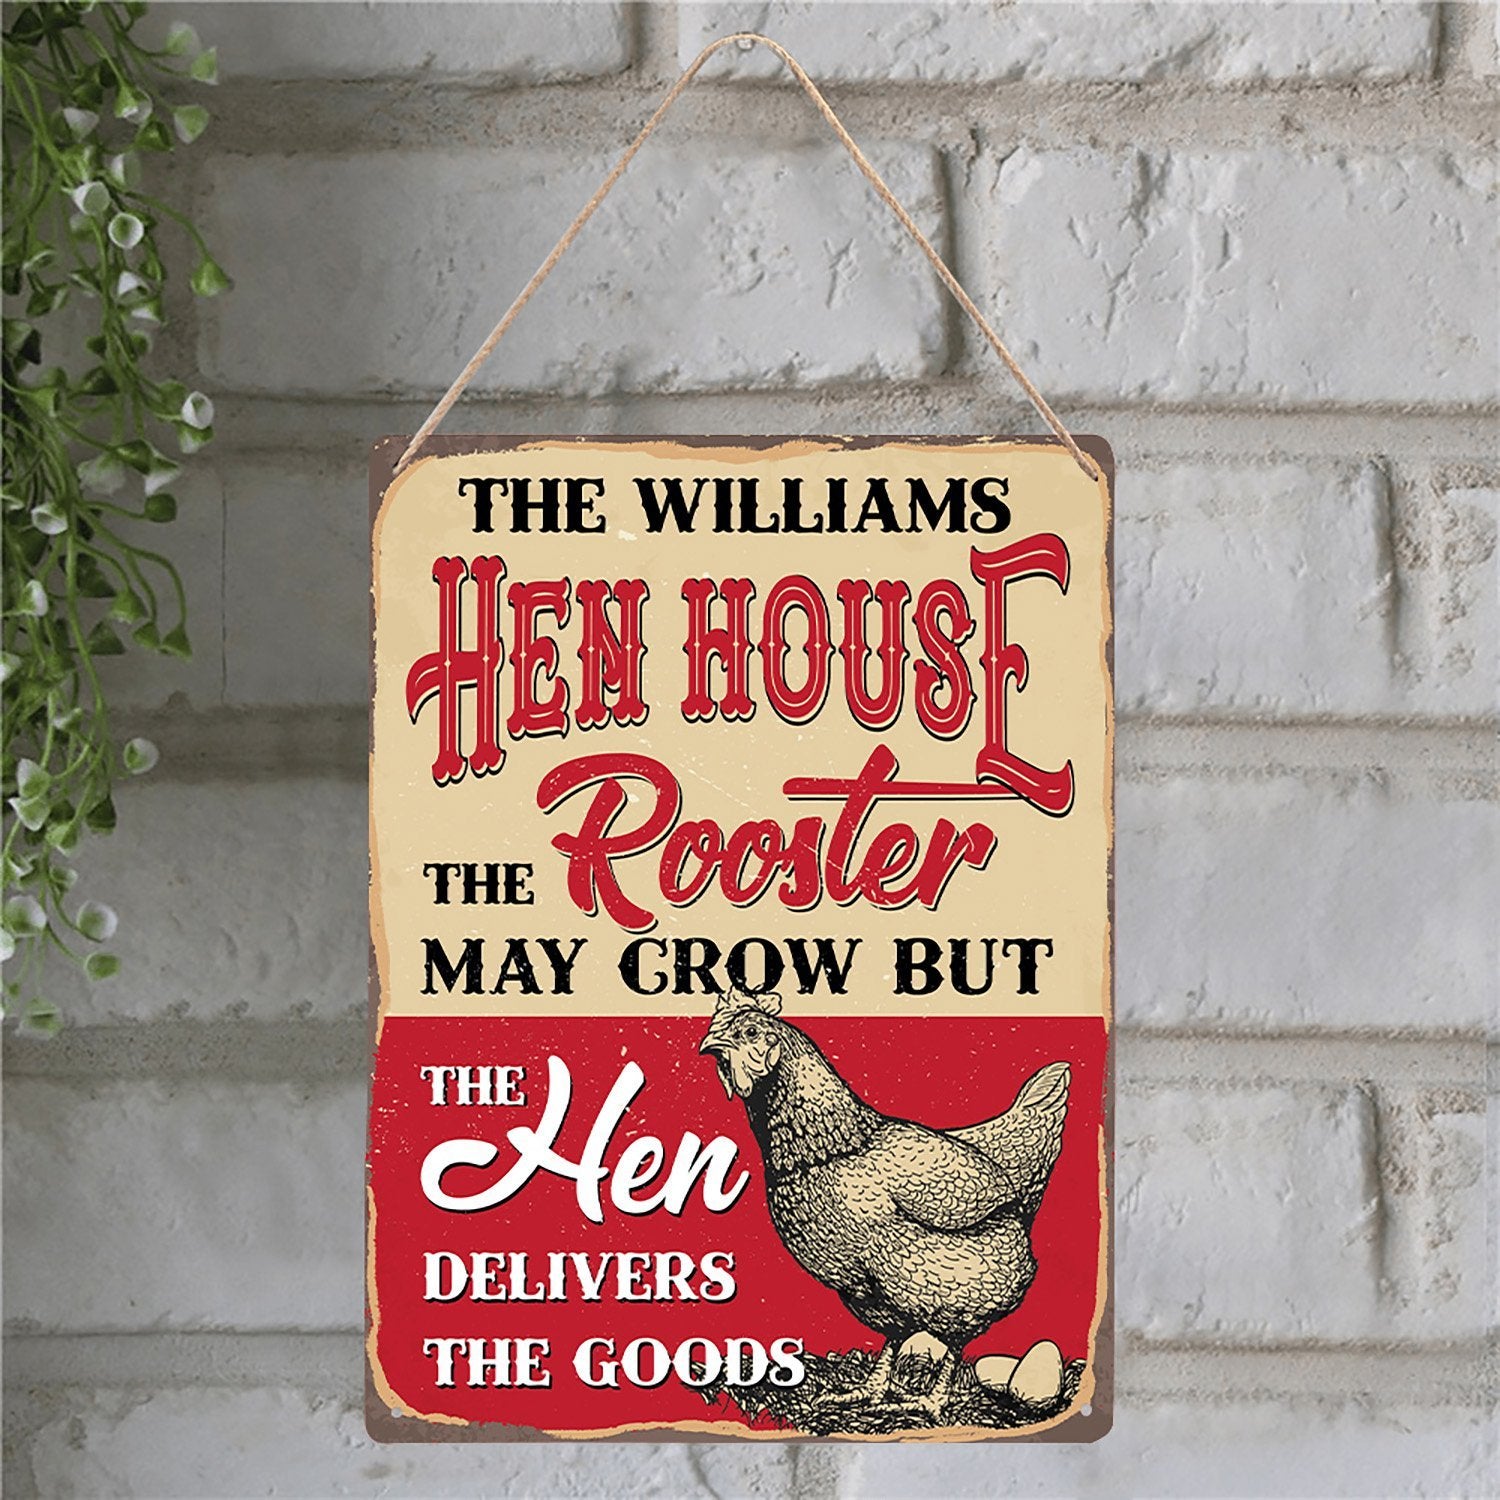 Hen House The Rooster May Grow But The Hen Delivers The Goods, Customized Farm Sign